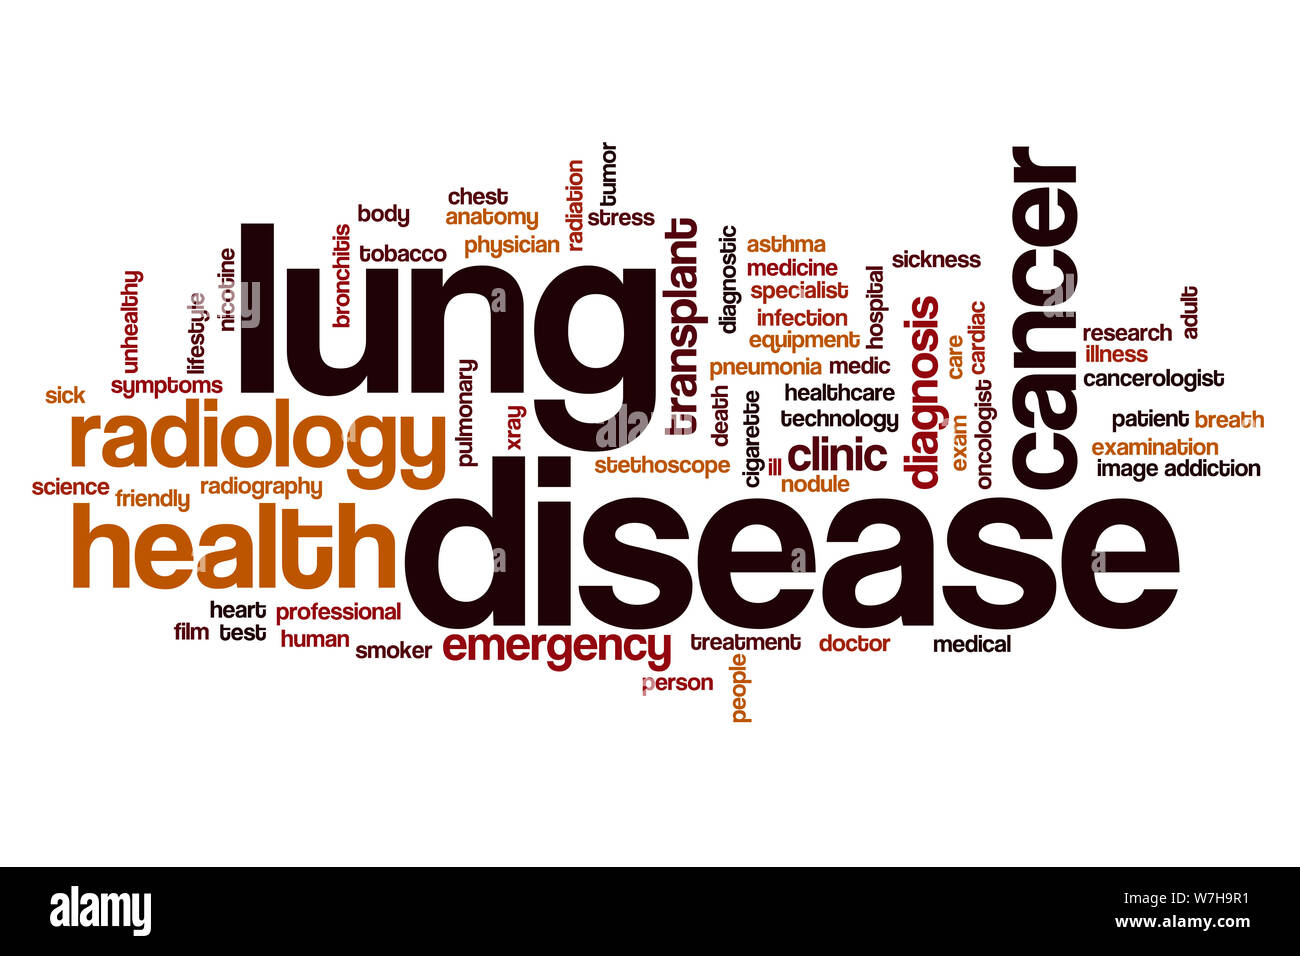 Lung disease word cloud concept Stock Photo